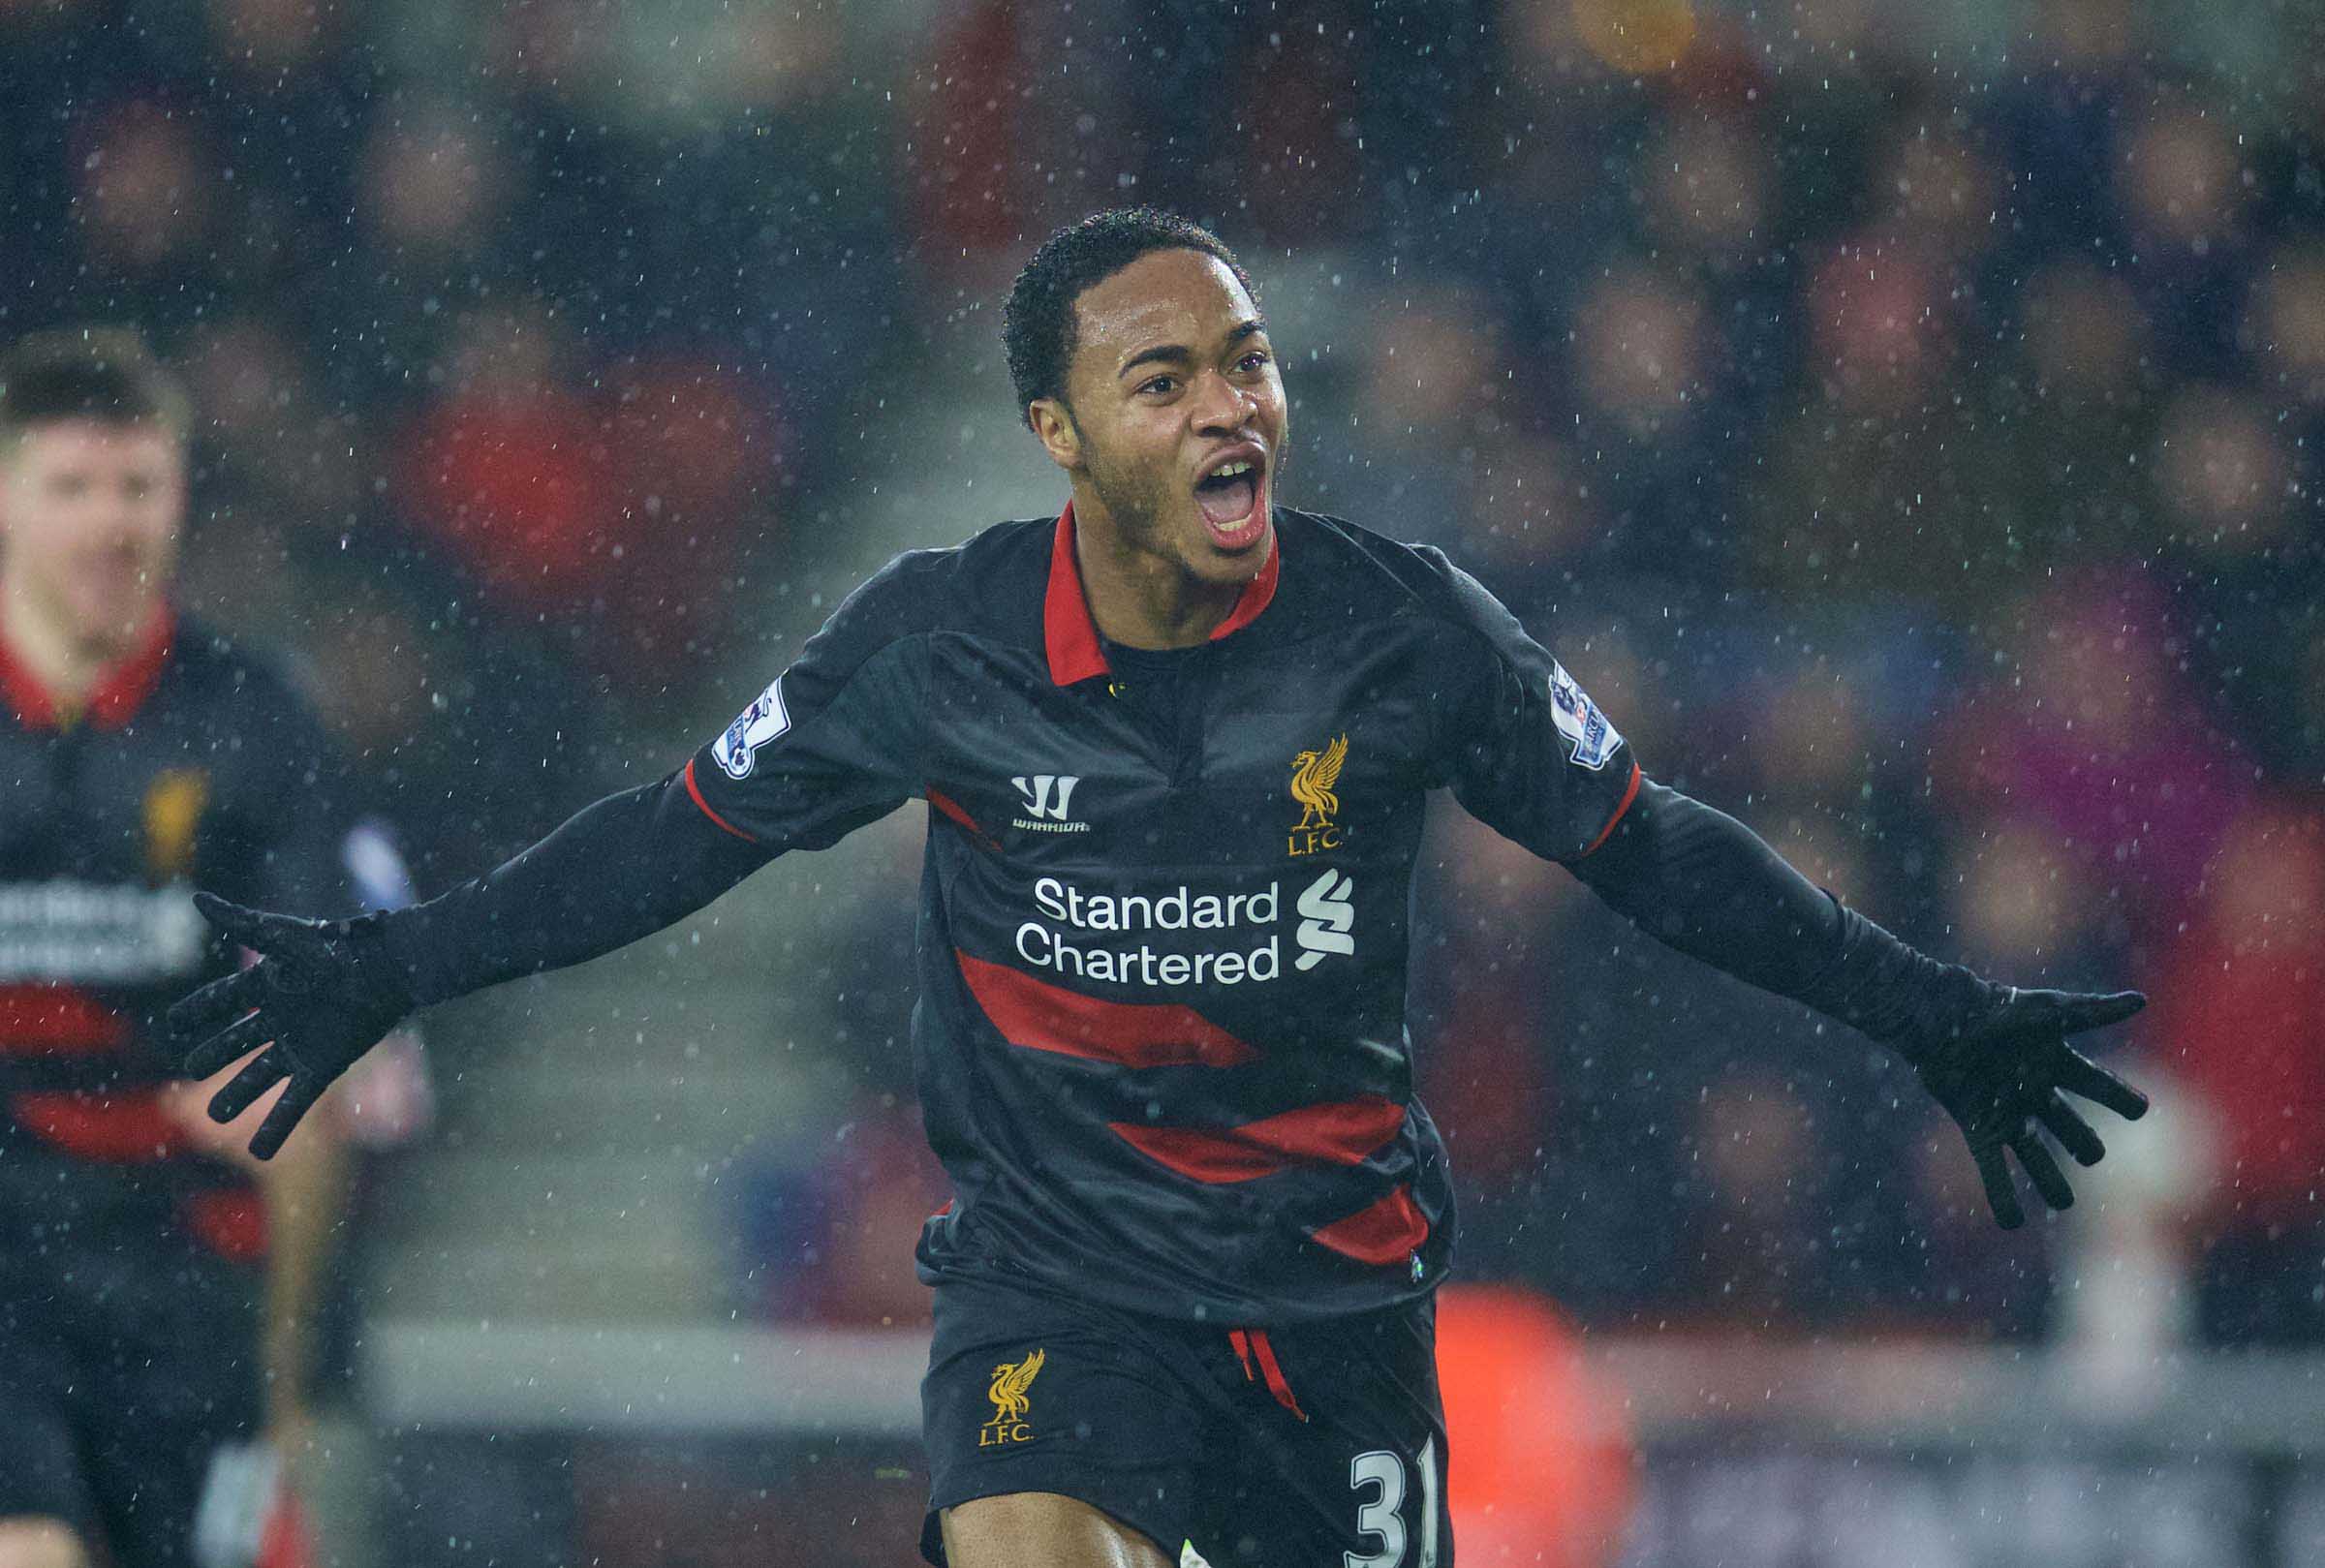 RAHEEM STERLING: WHAT’S HIS BEST POSITION?